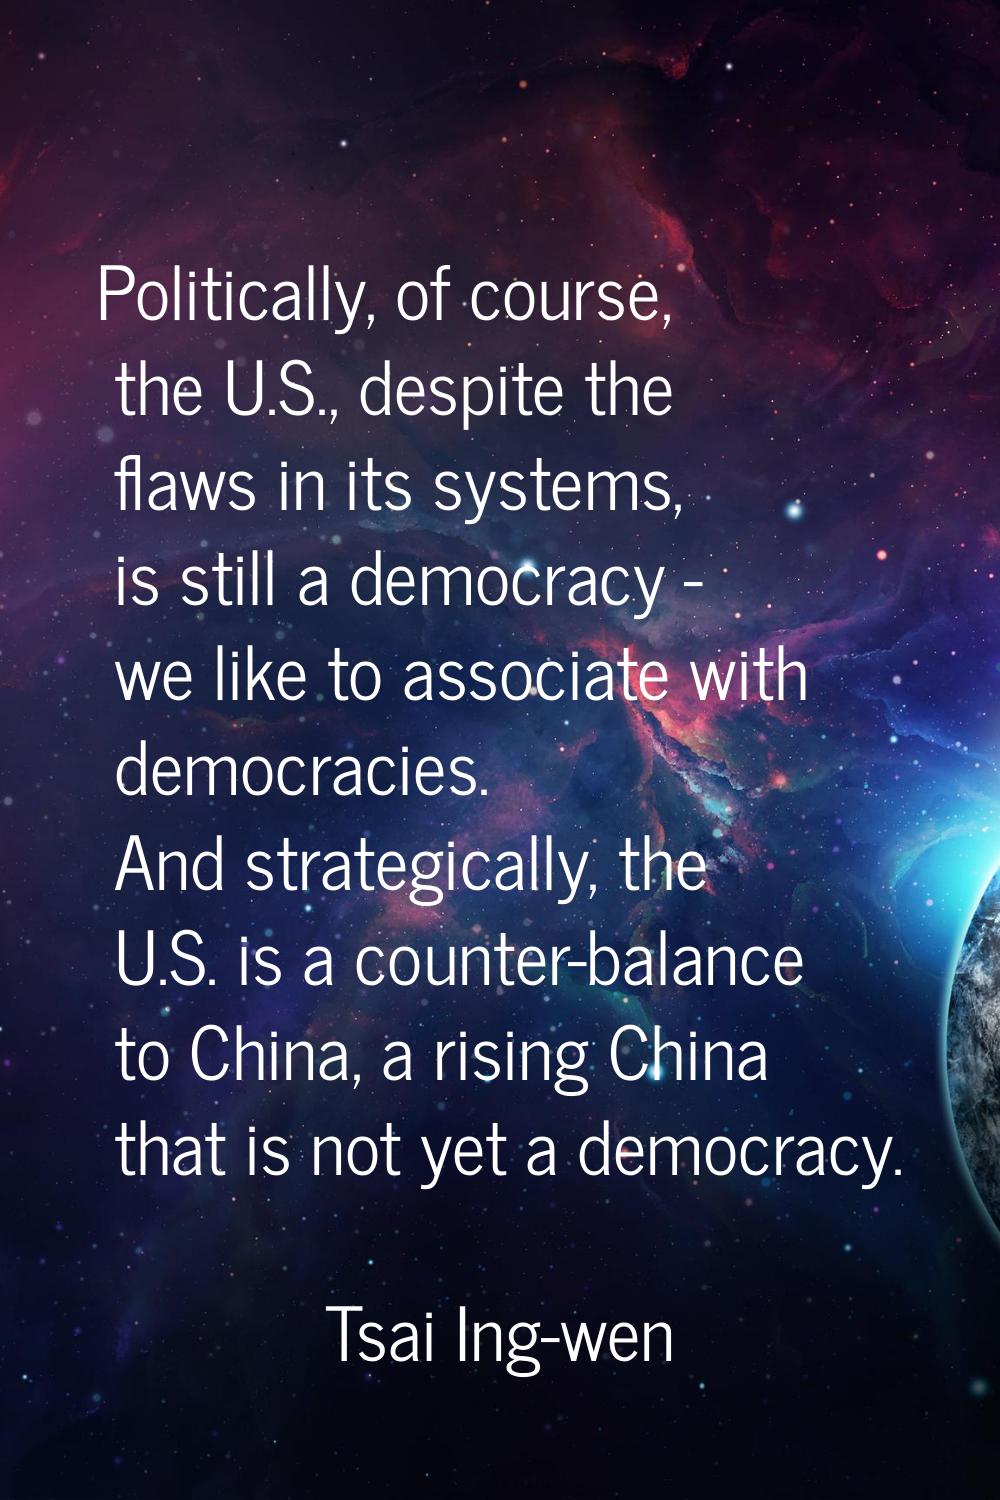 Politically, of course, the U.S., despite the flaws in its systems, is still a democracy - we like 